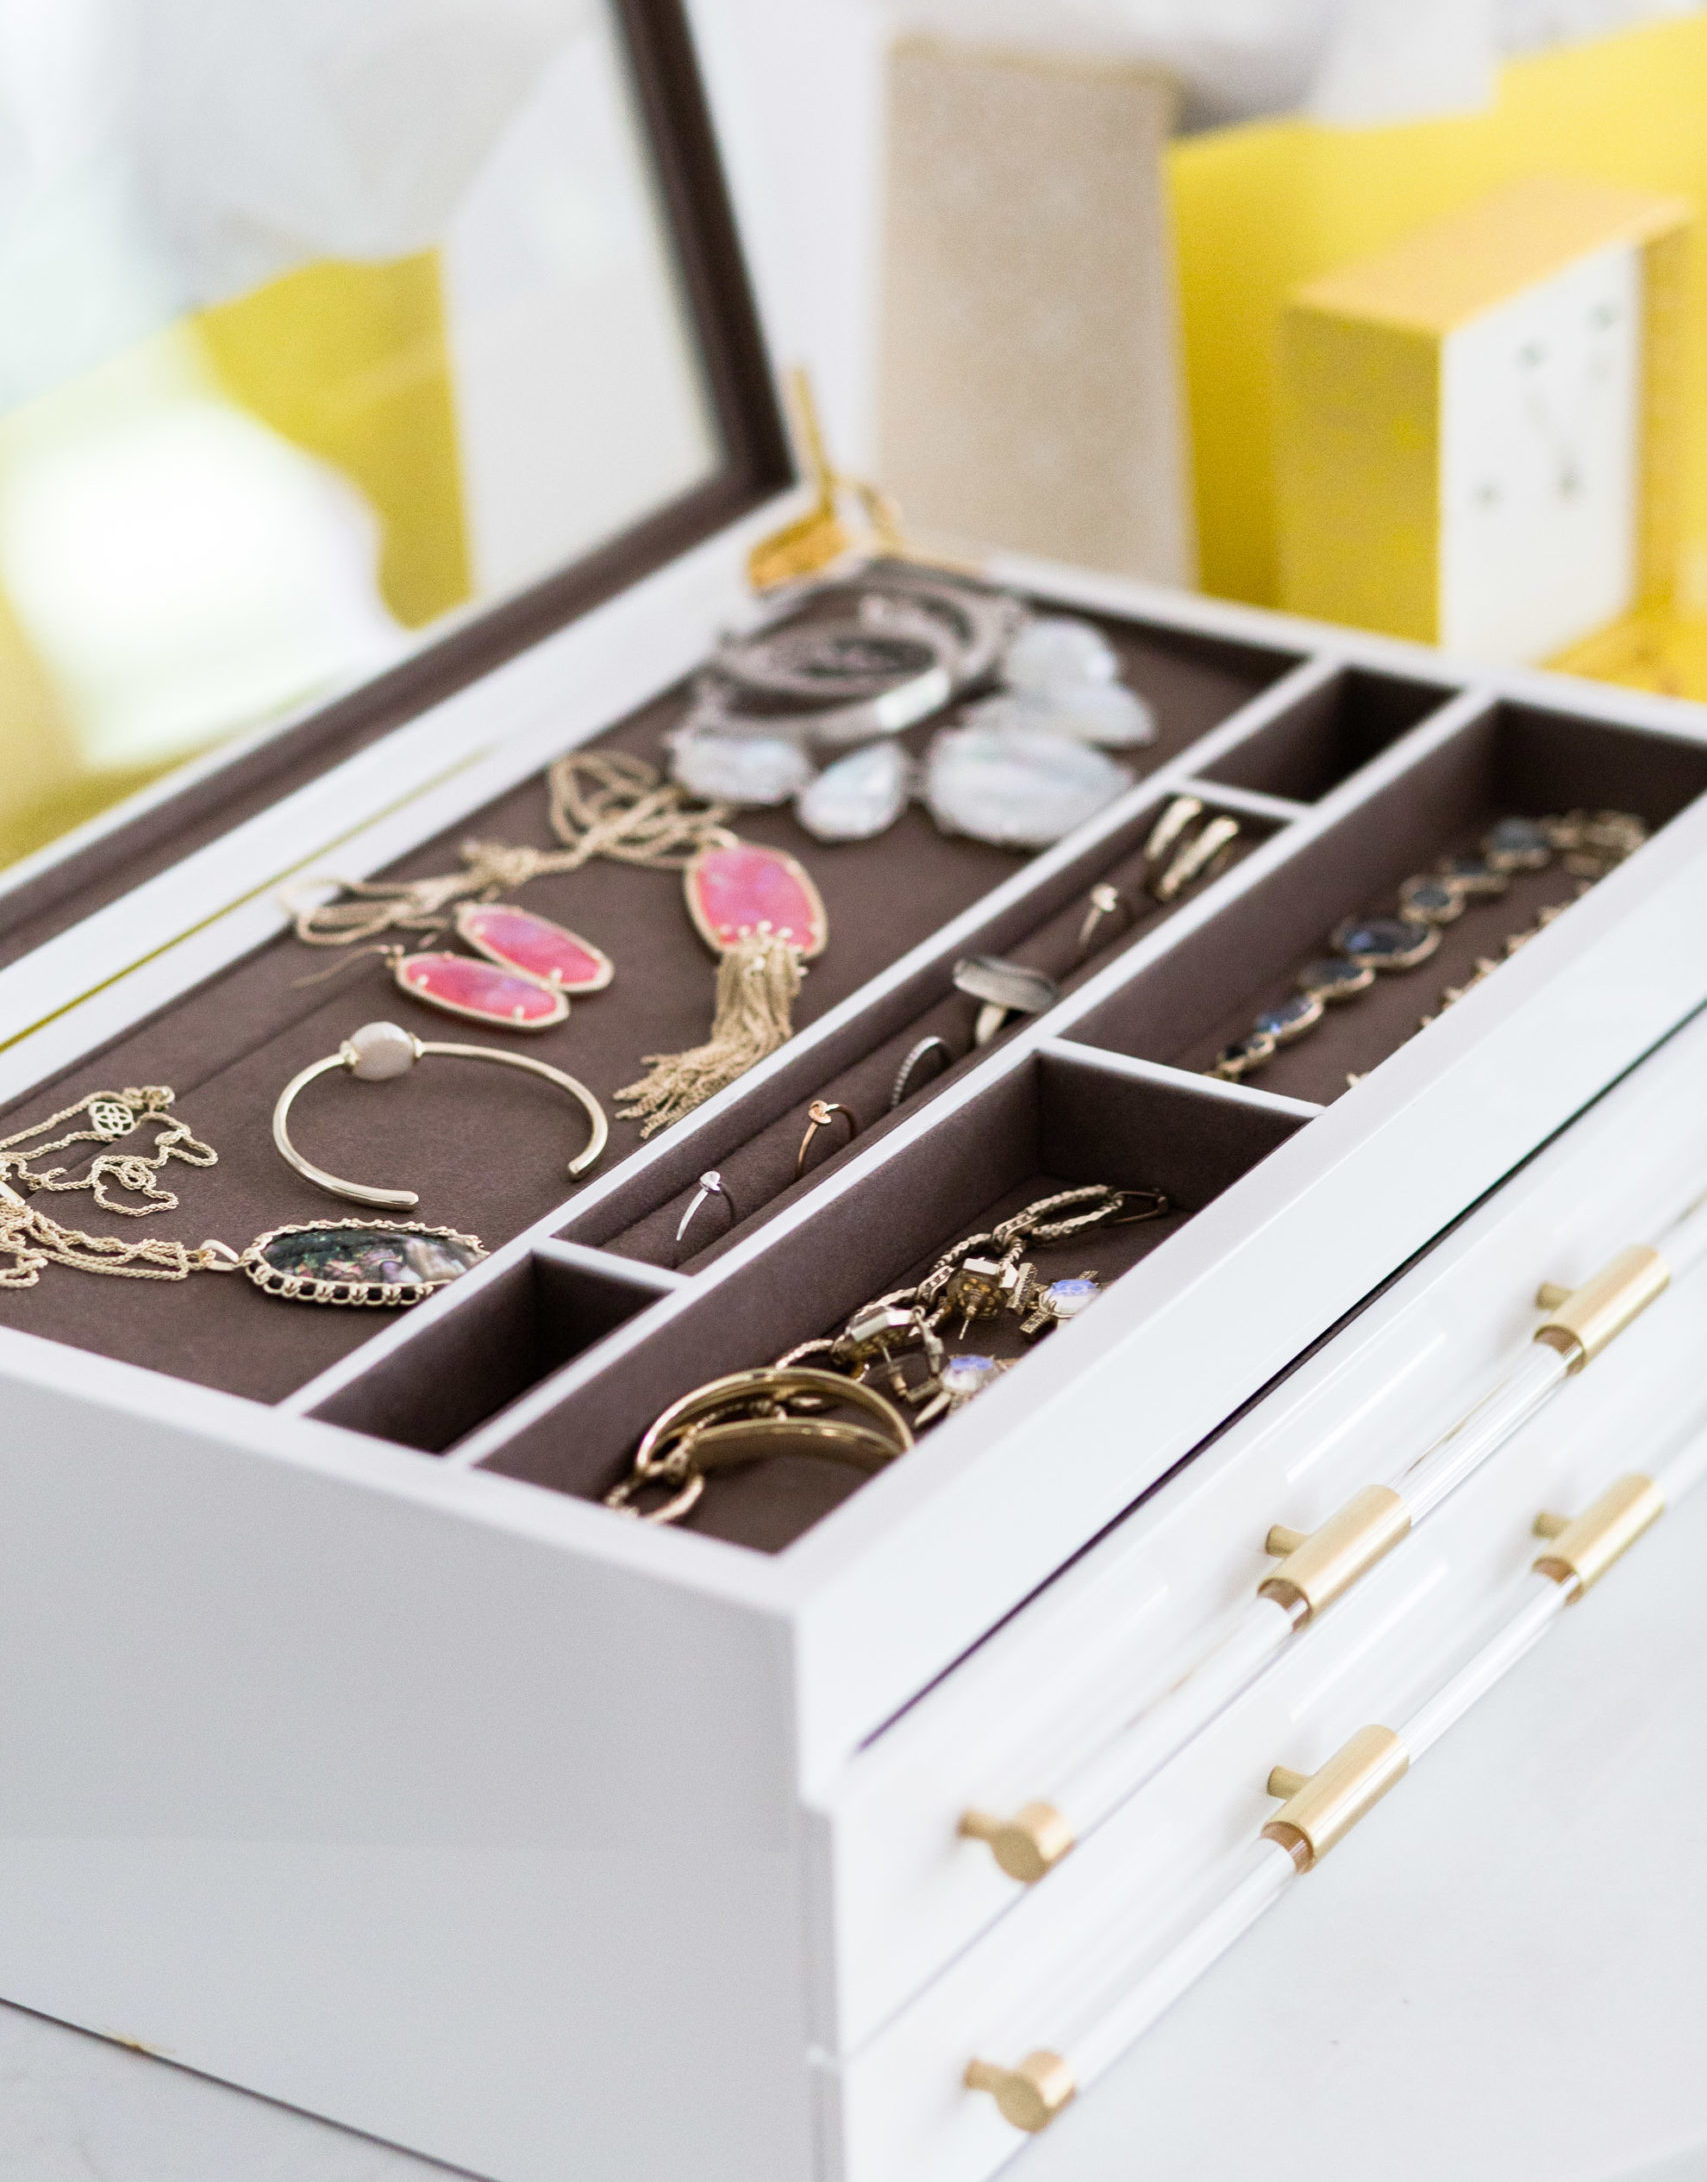 kendra-scott-mothers-day-gifts-promo